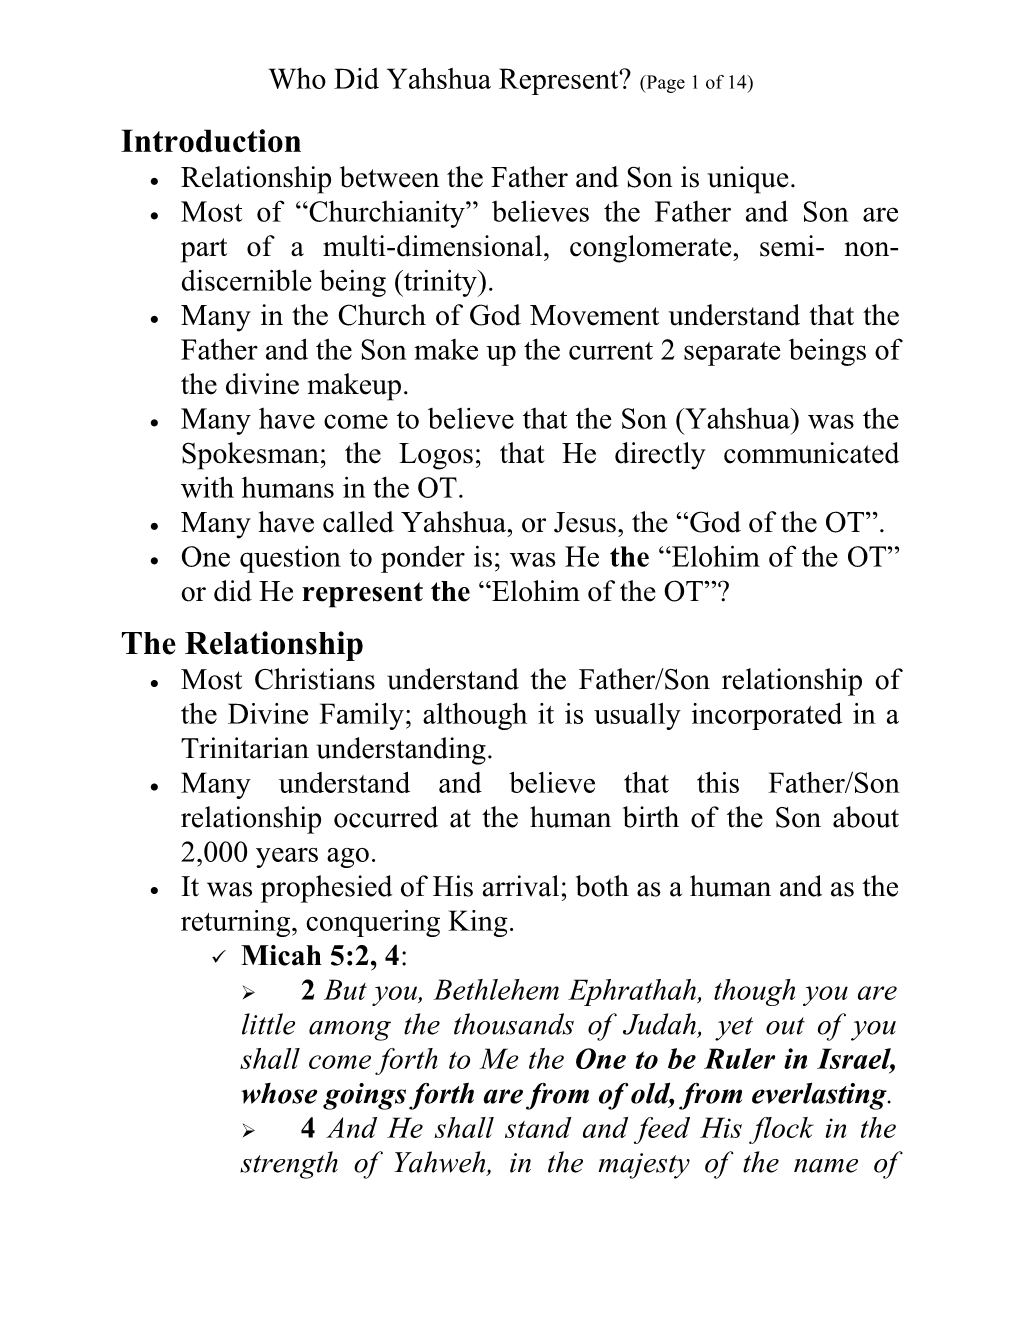 Who Did Yahshua Represent?(Page 1 of 14)